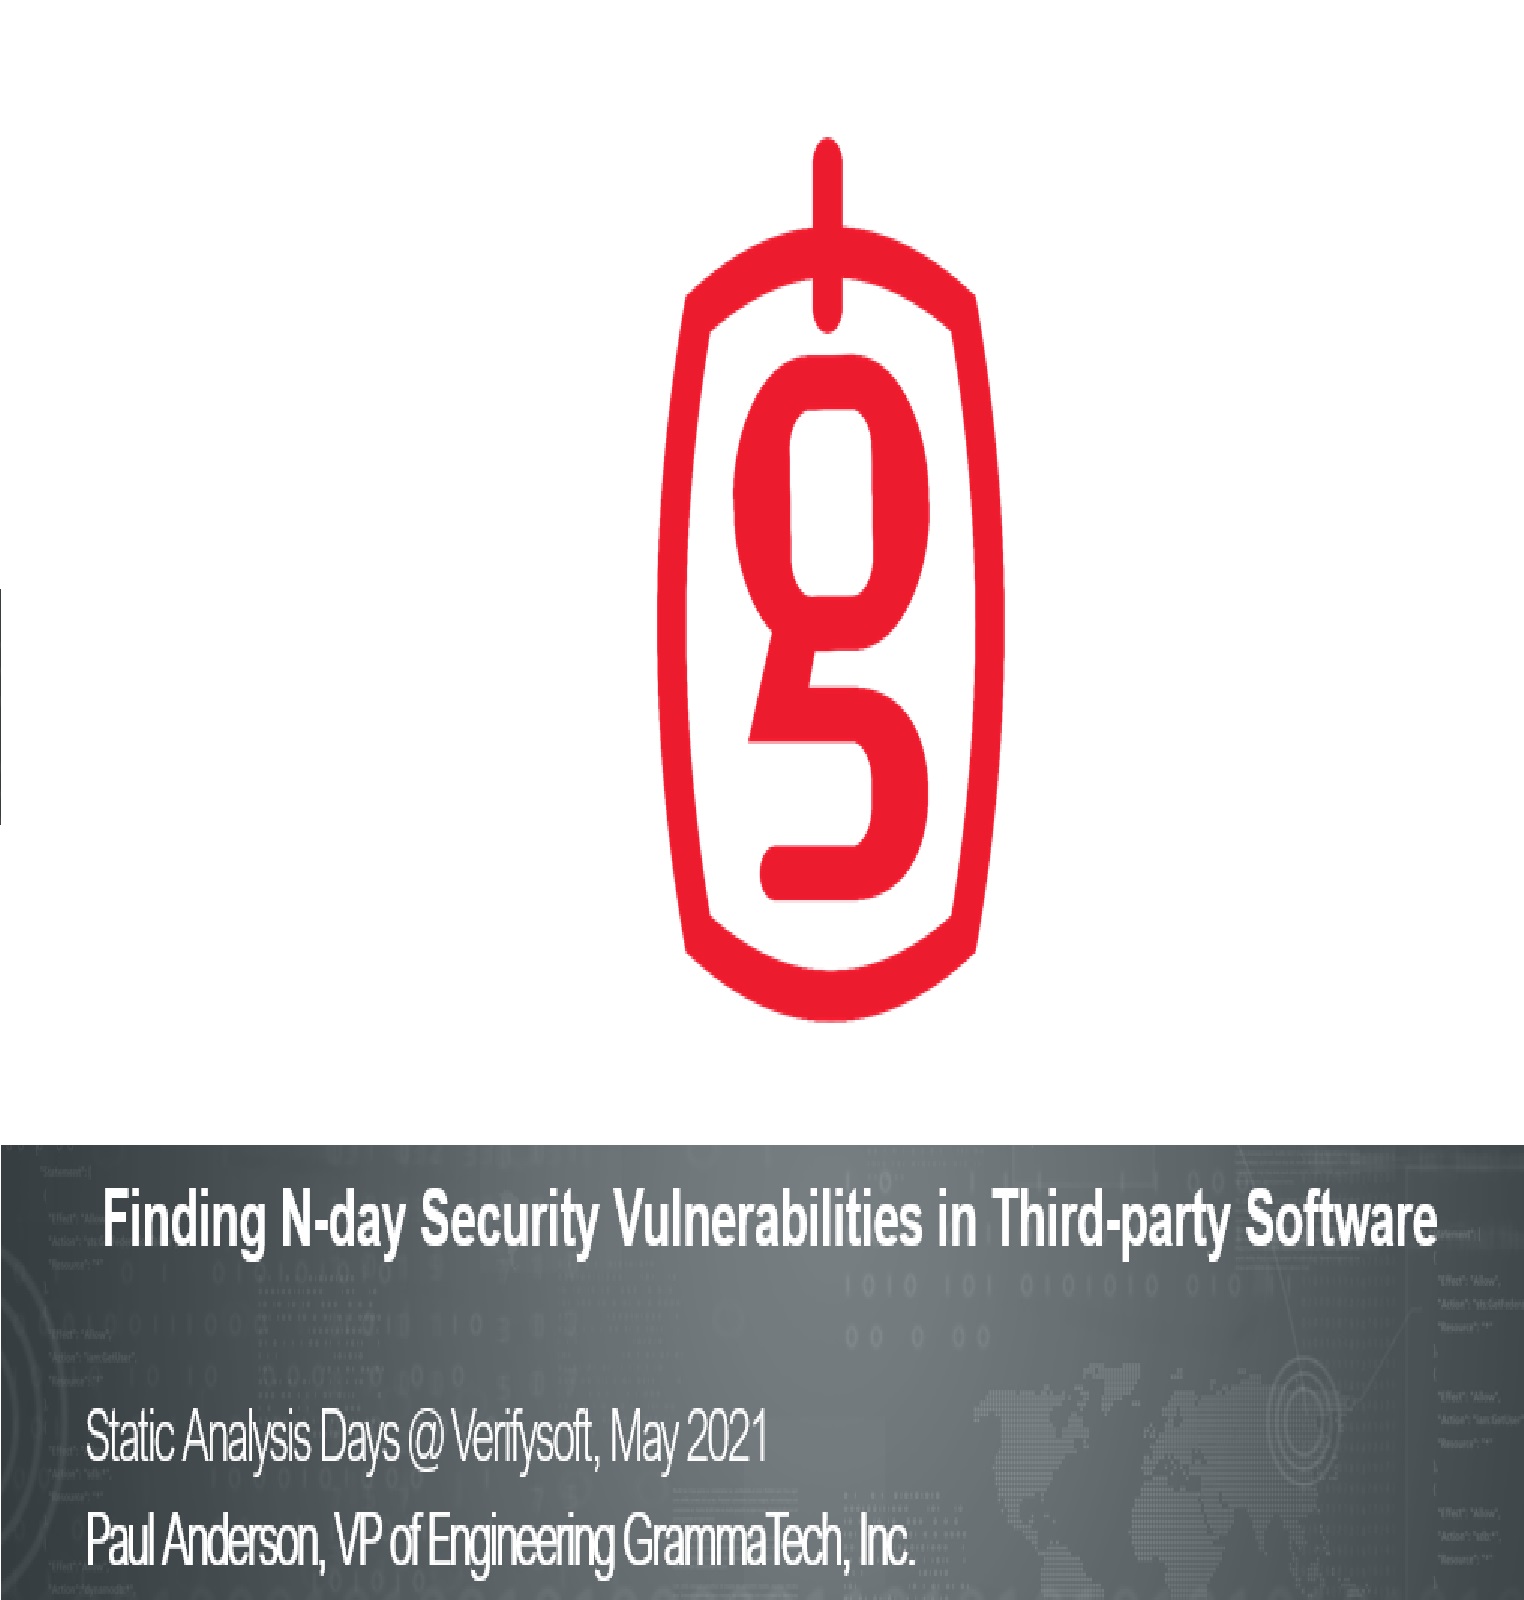 GrammaTech: Finding N-day Security Vulnerabilities in Third-party Software